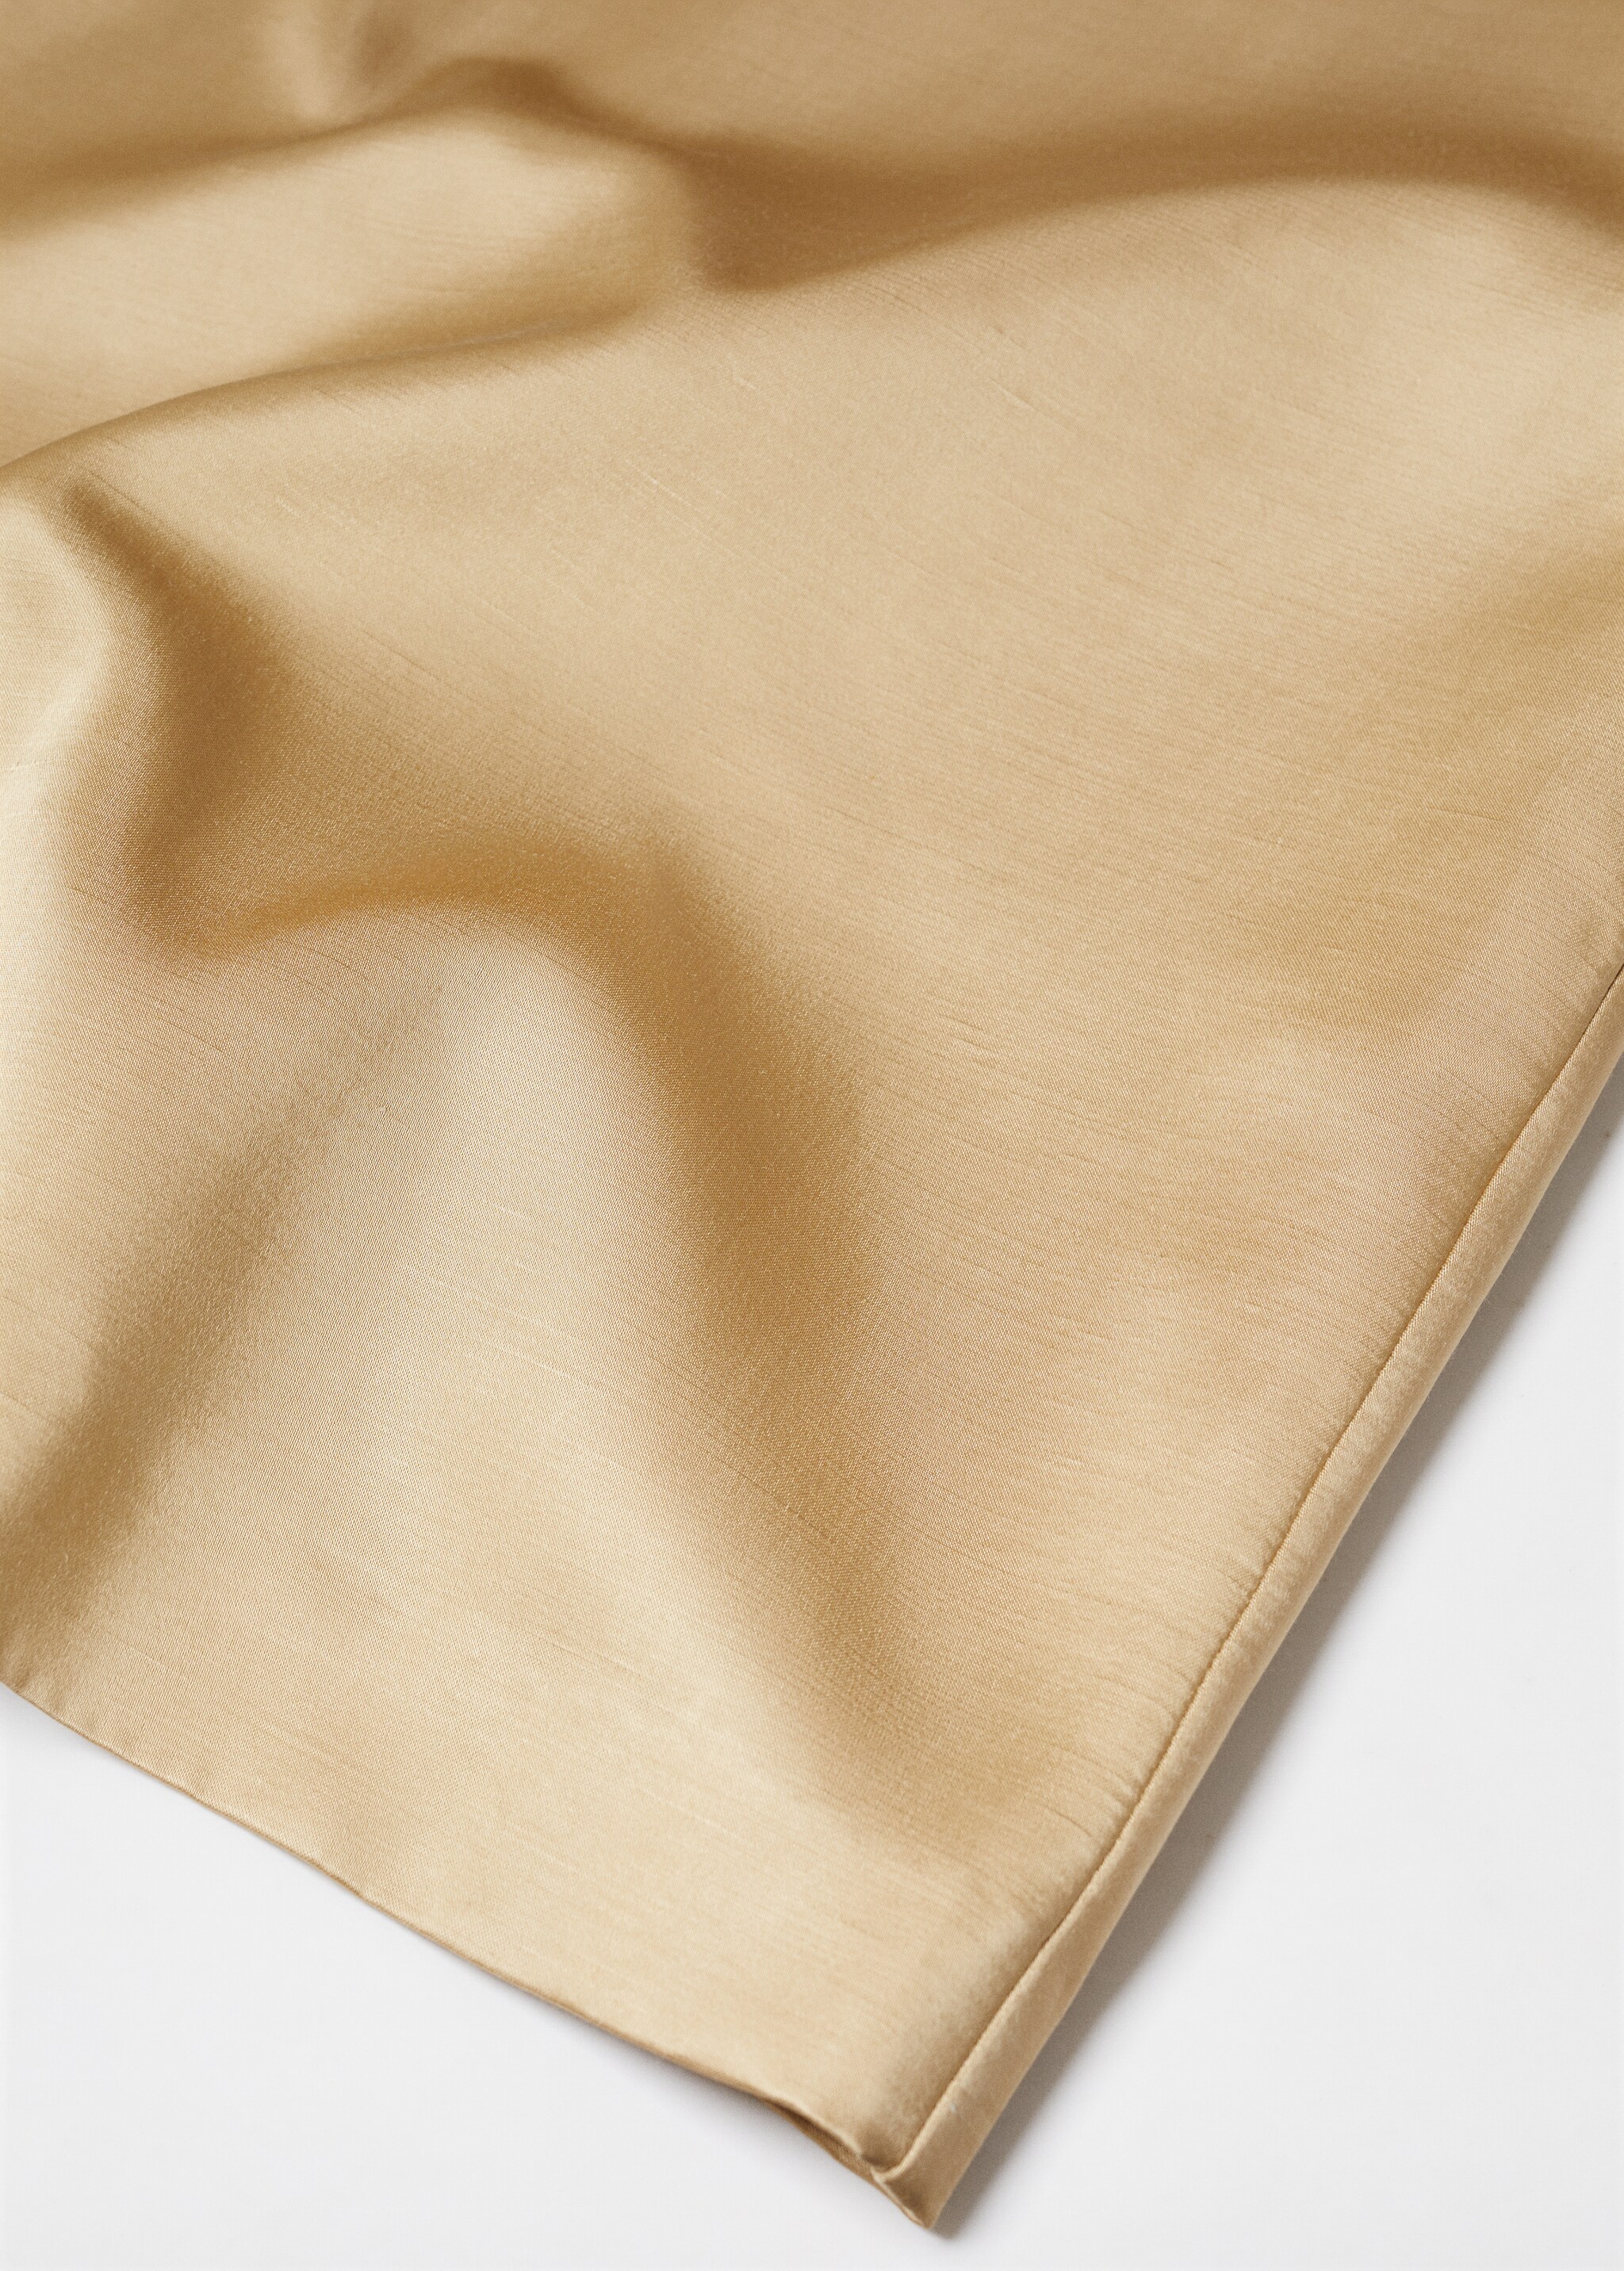 Short satin dress - Details of the article 8